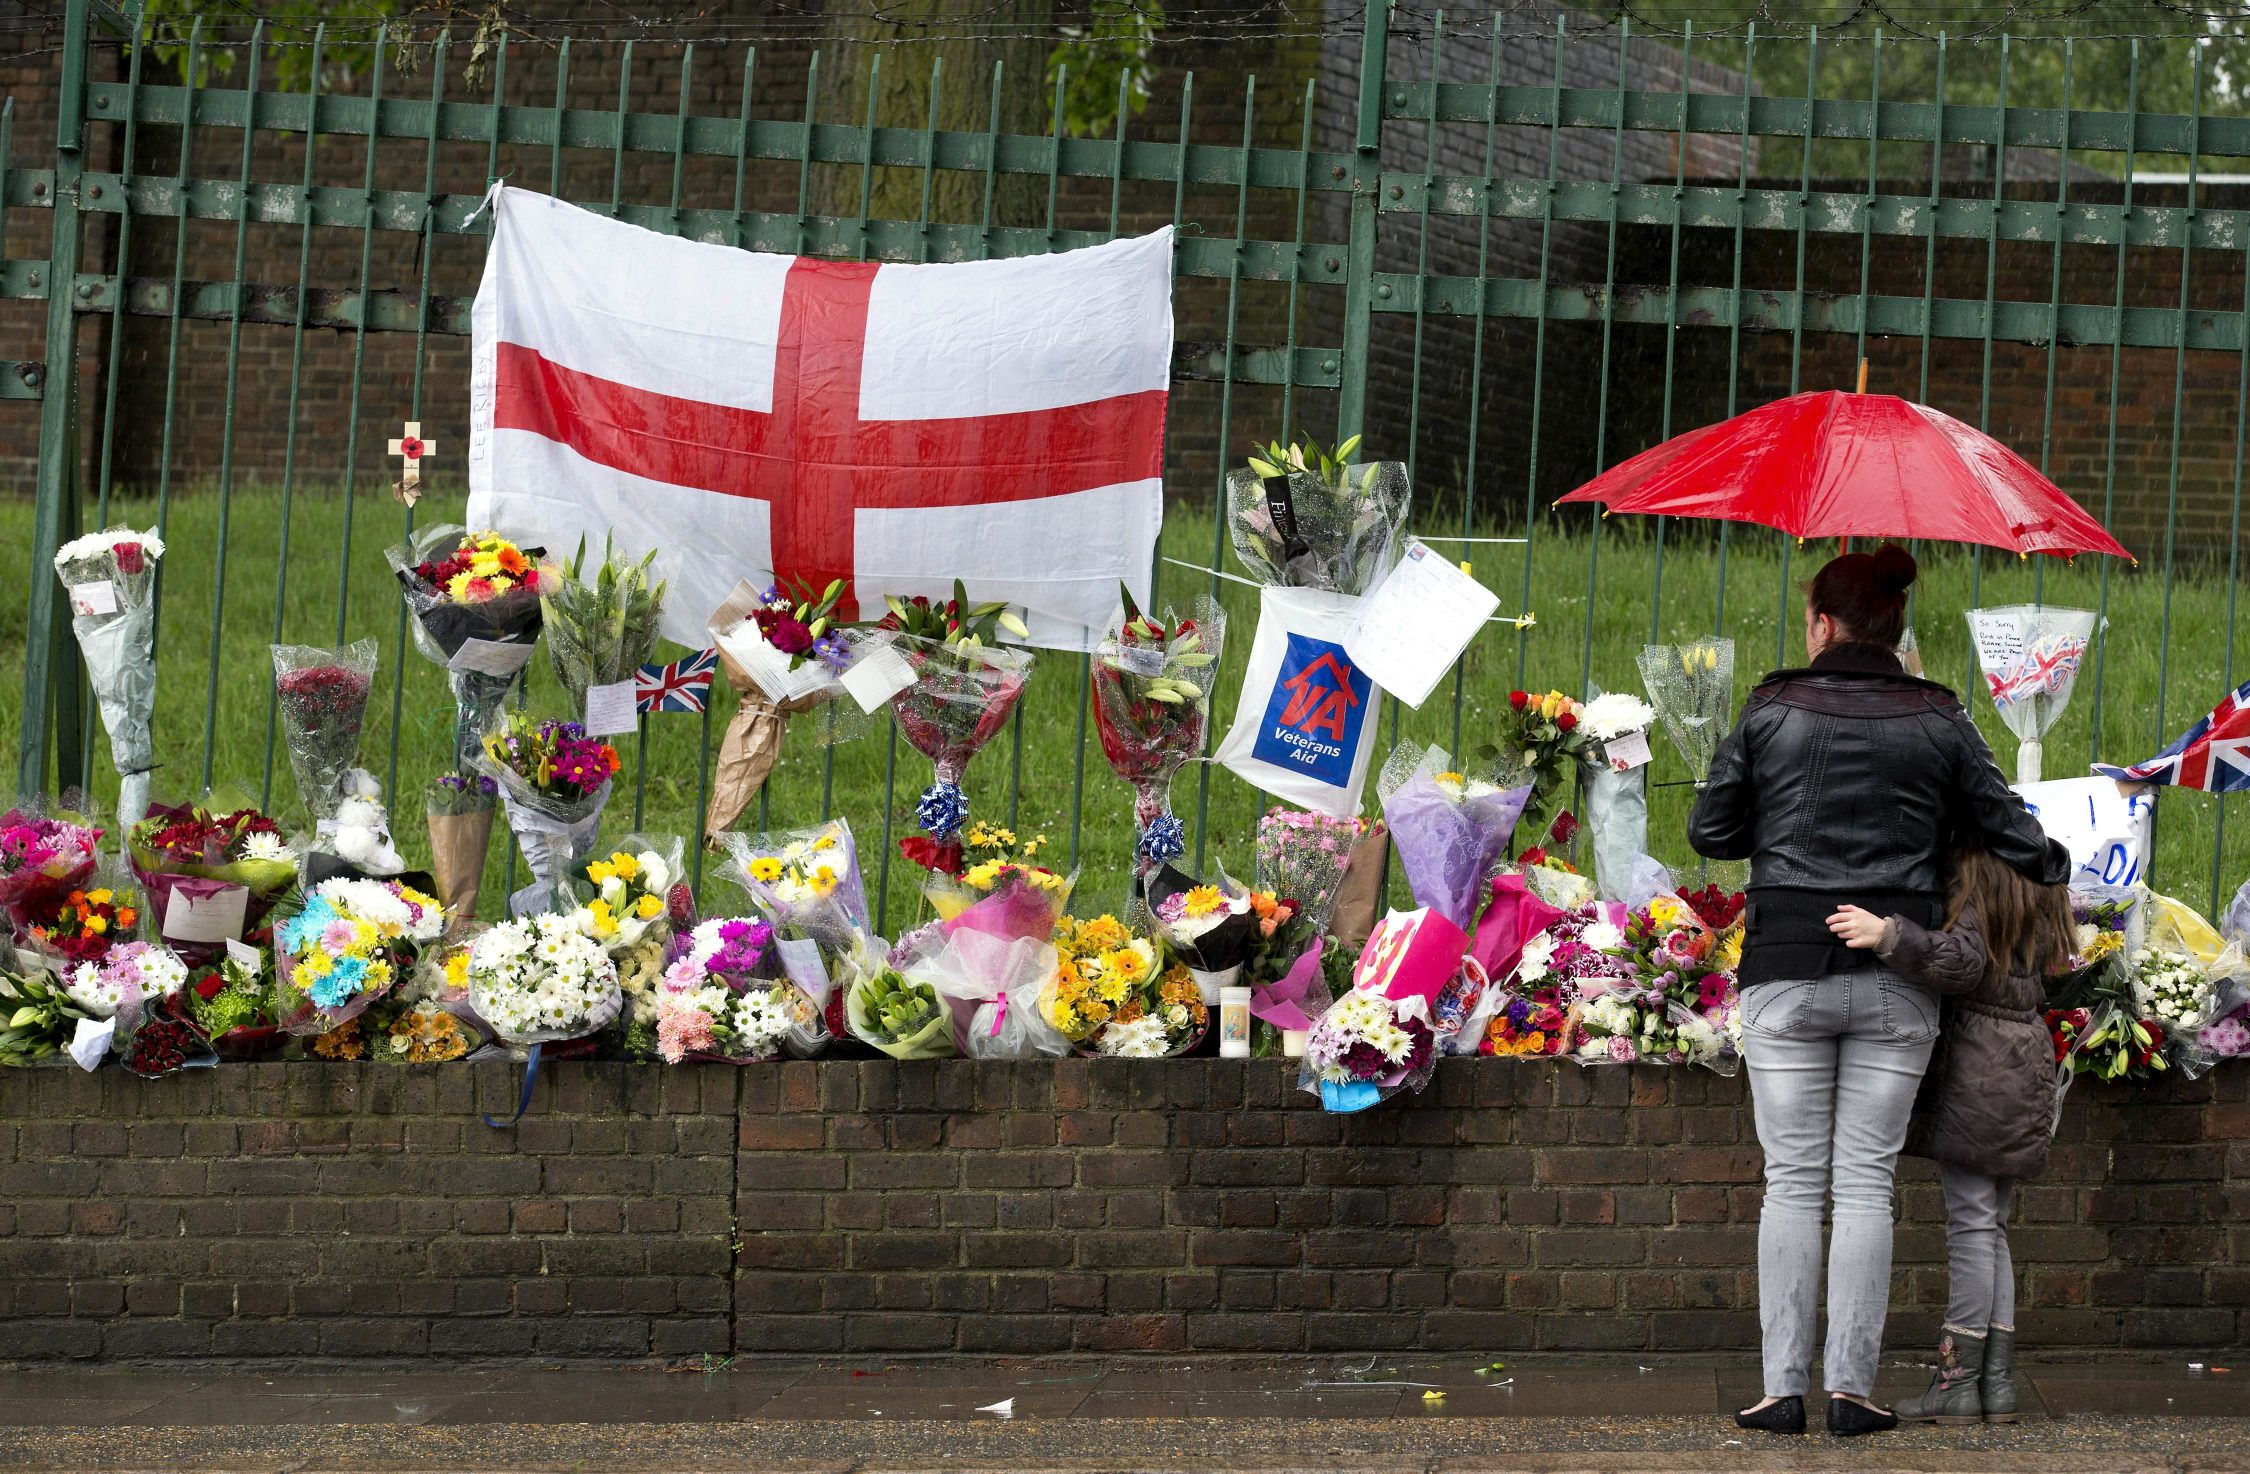 Floral tributes at the scene where Drummer Lee Rigby of the 2nd Battalion, Royal Regiment of Fusiliers, was killed outside Woolwich Barracks in London. Photo: AFP